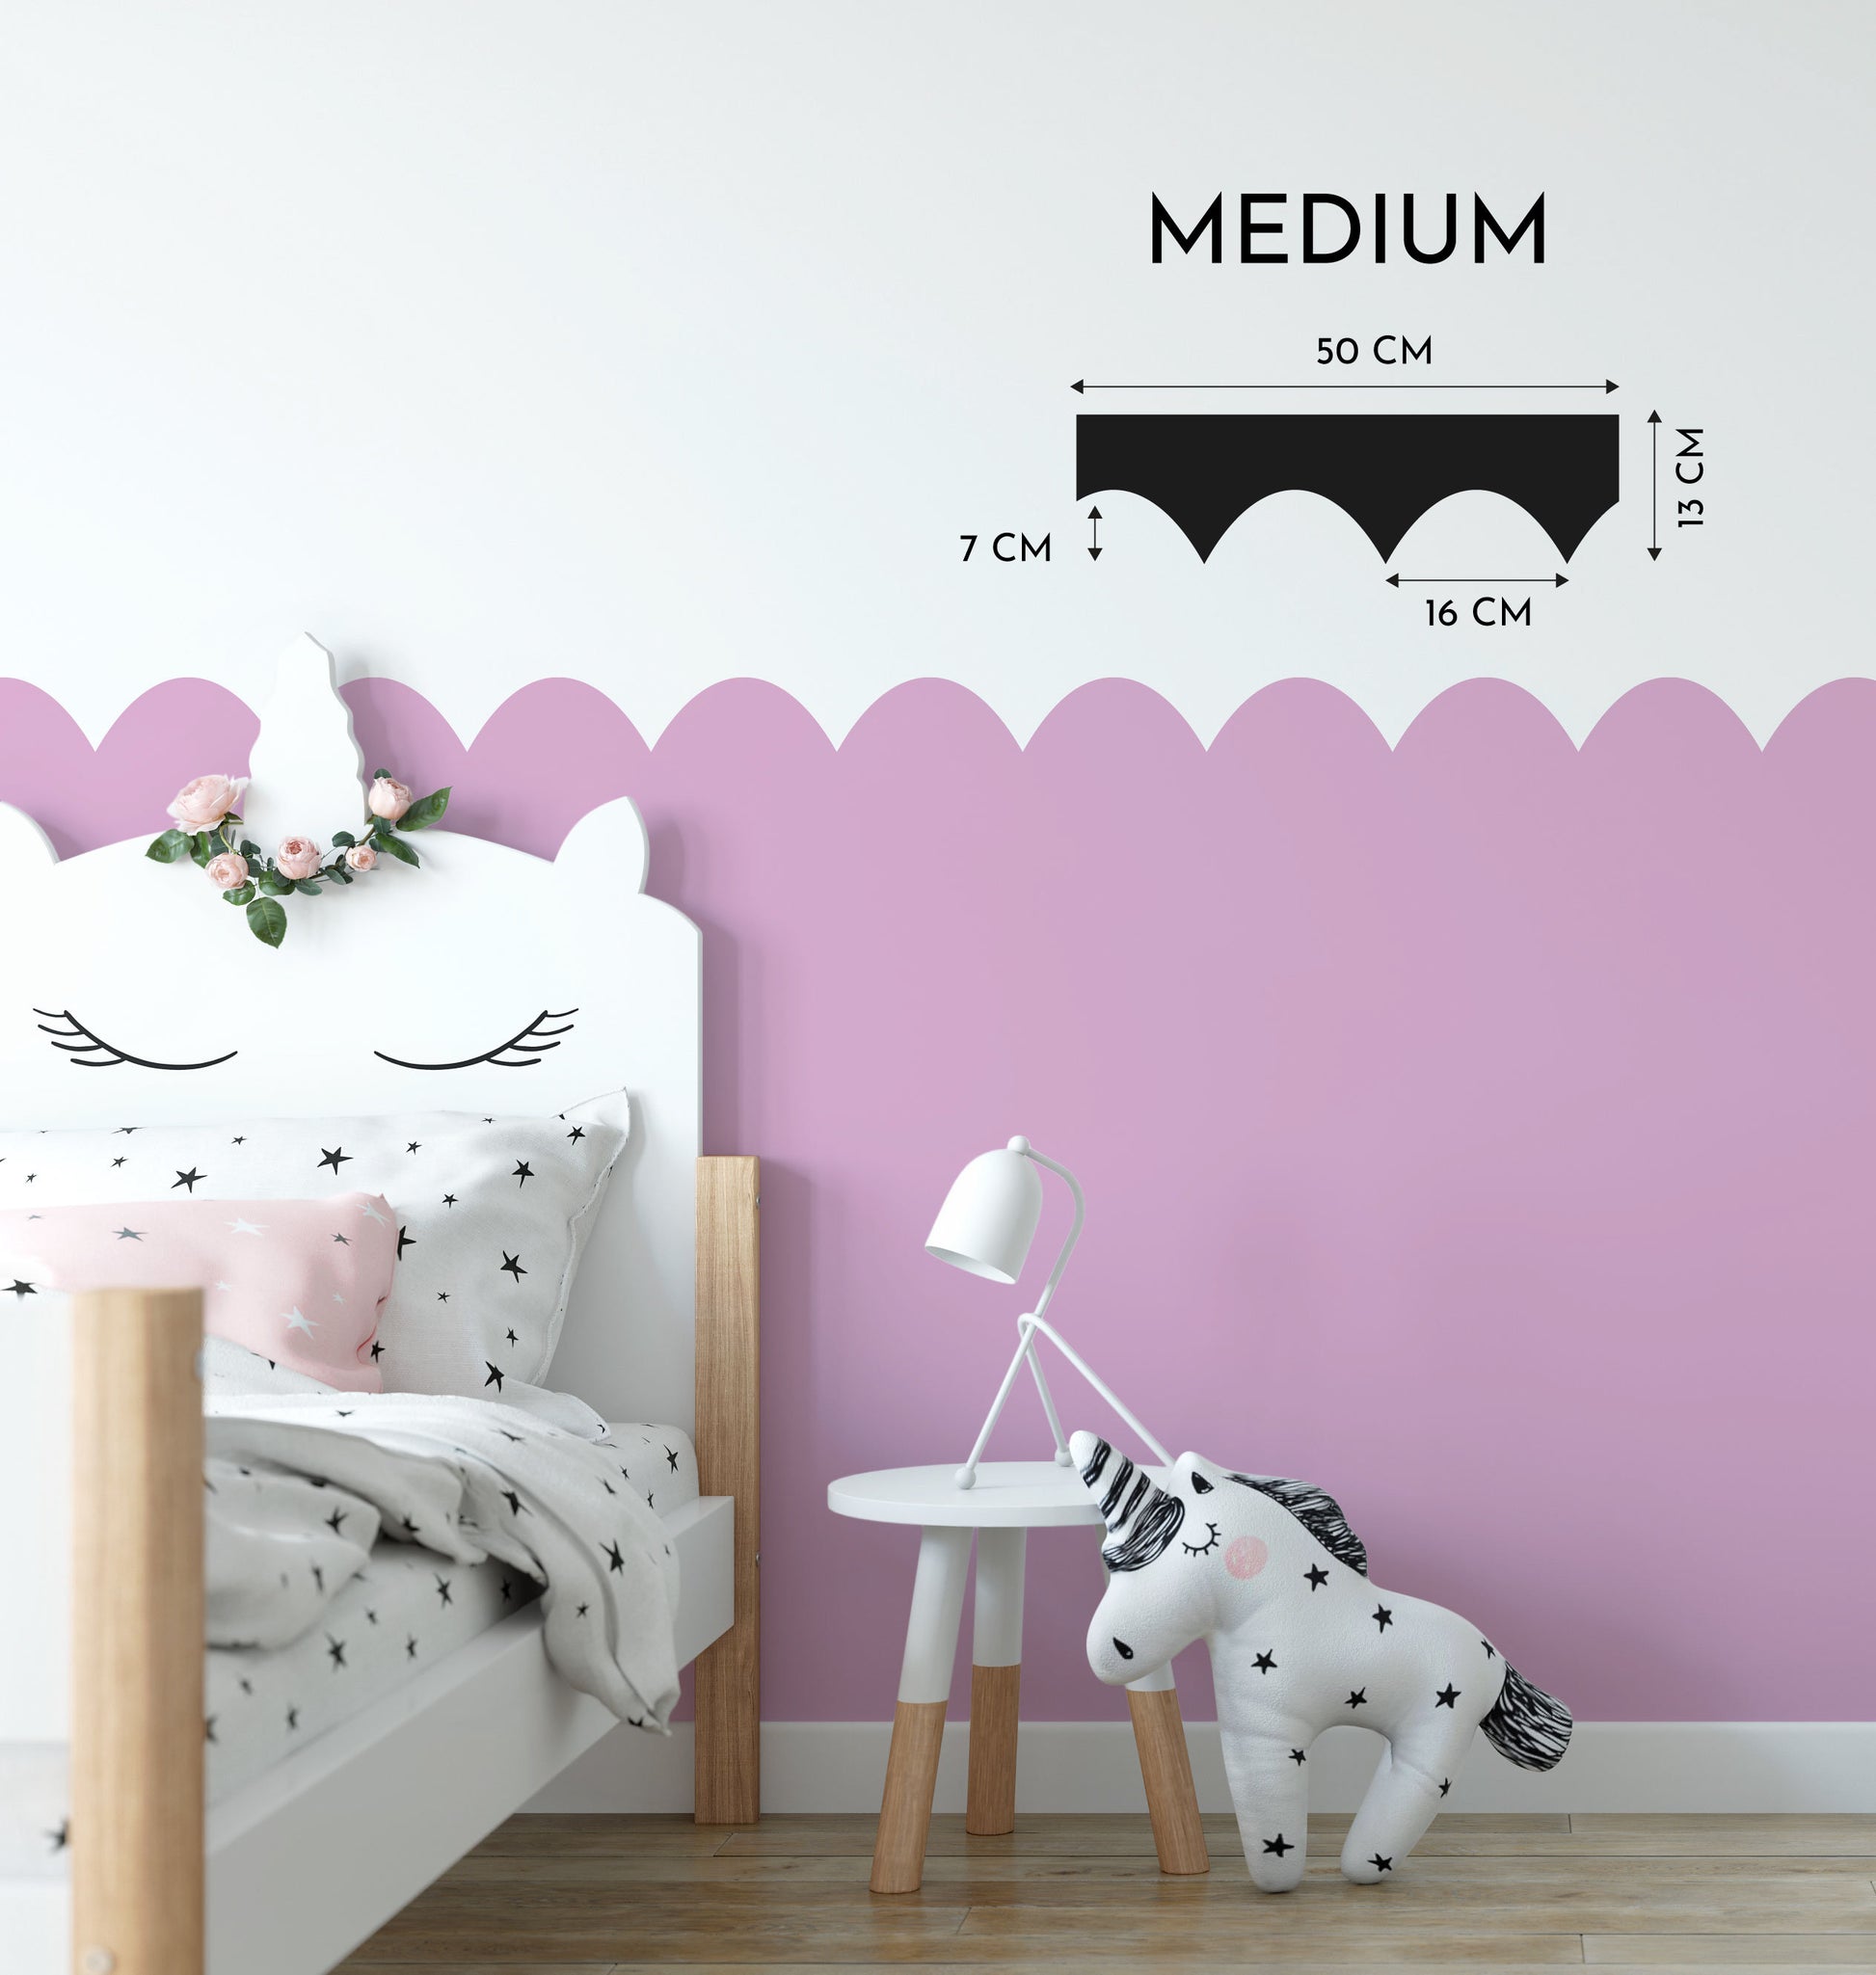 Nursery Rooms Painting Boarder Stencil | Stencils For Painting | Wall Paint Stencils For Kids Children's Bedrooms Wall Decor